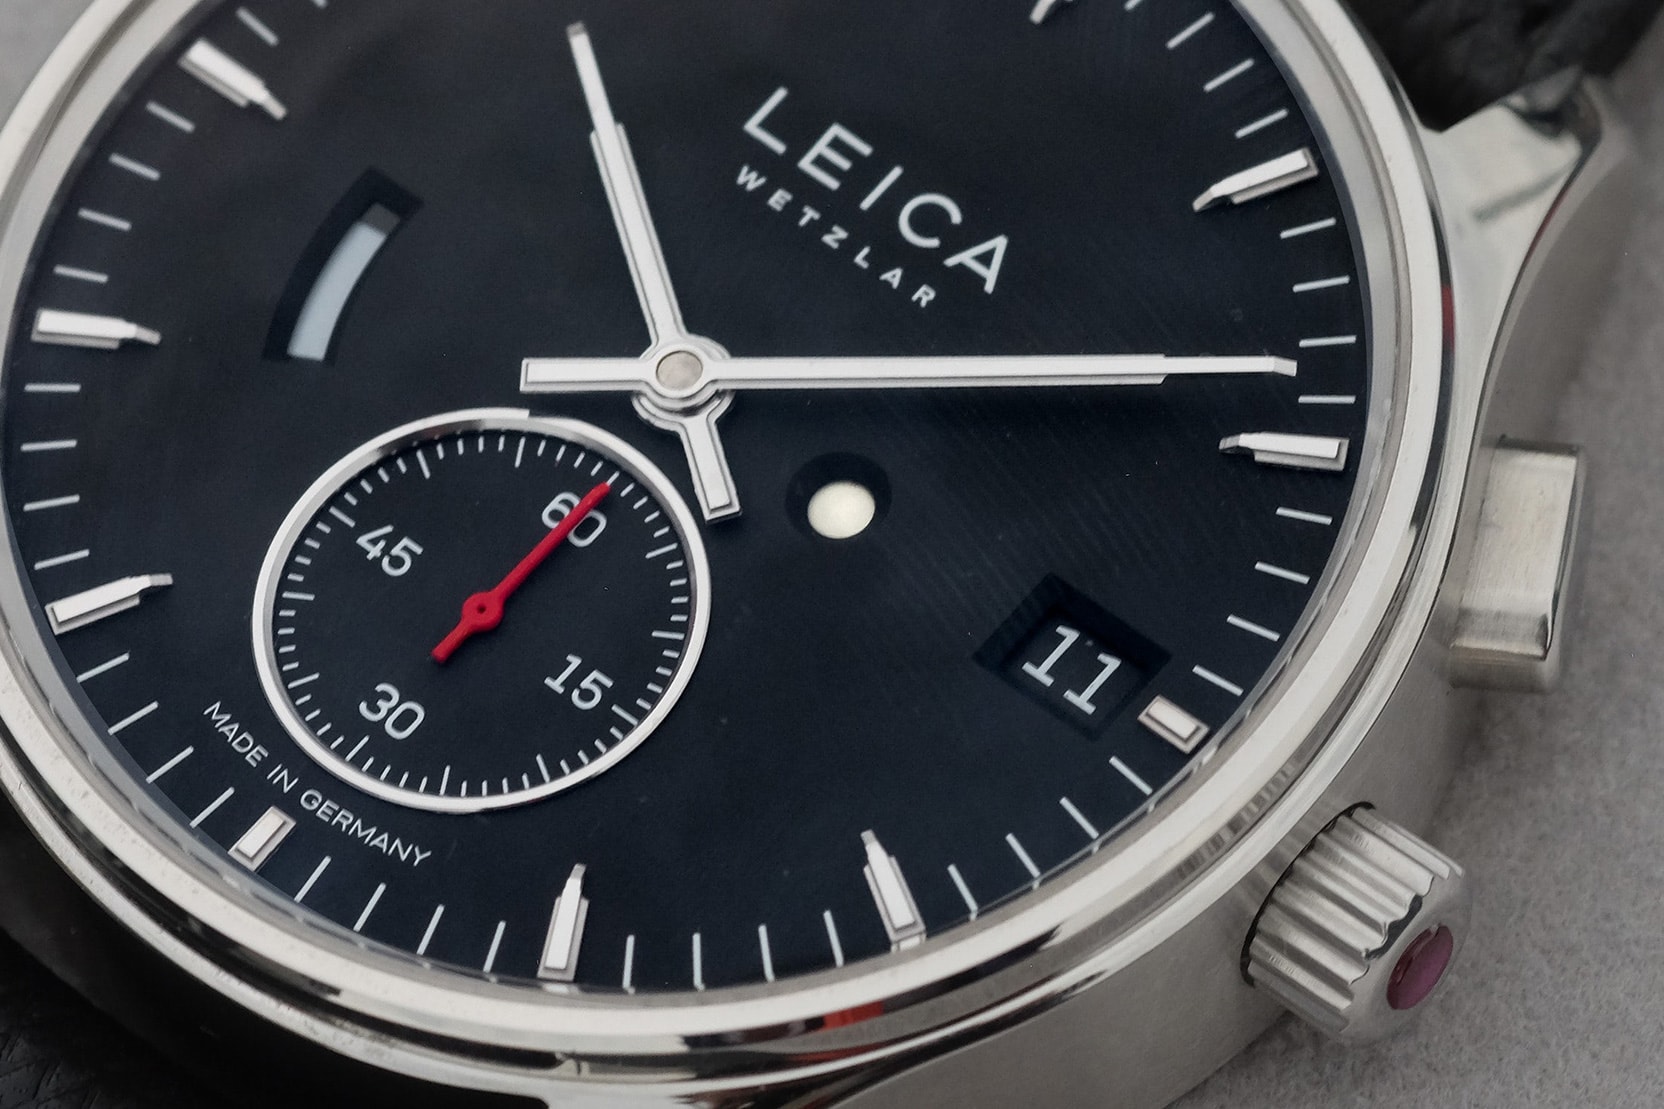 Leica L1 and L2 Mechanical Watch German engineering WAtches cameras luxury Summilux summicron noctilux classic